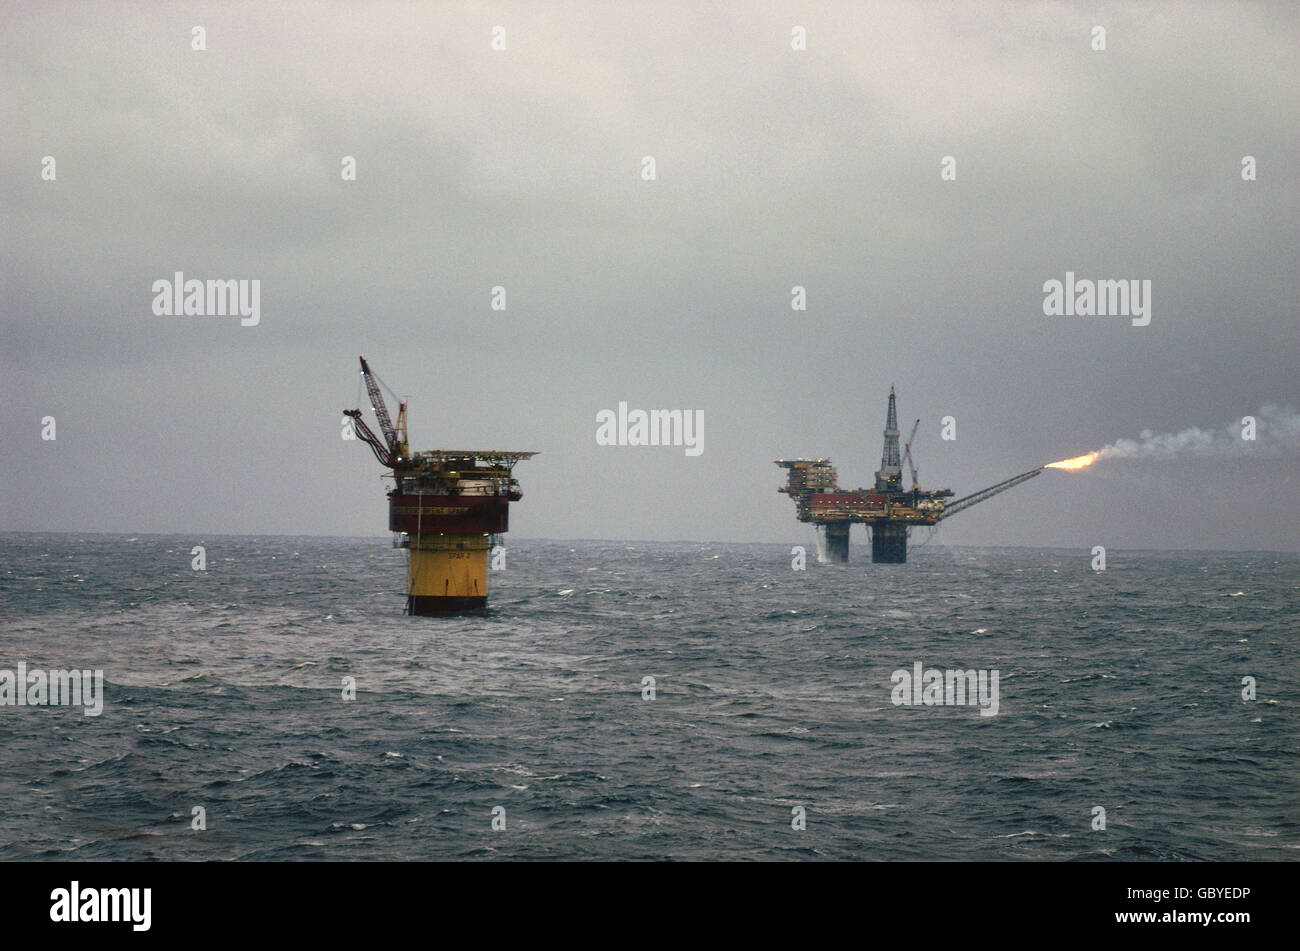 industry, oil, drilling platform on the sea, drilling platform Brent B, northeastern of Scotland, 1978, Additional-Rights-Clearences-Not Available Stock Photo